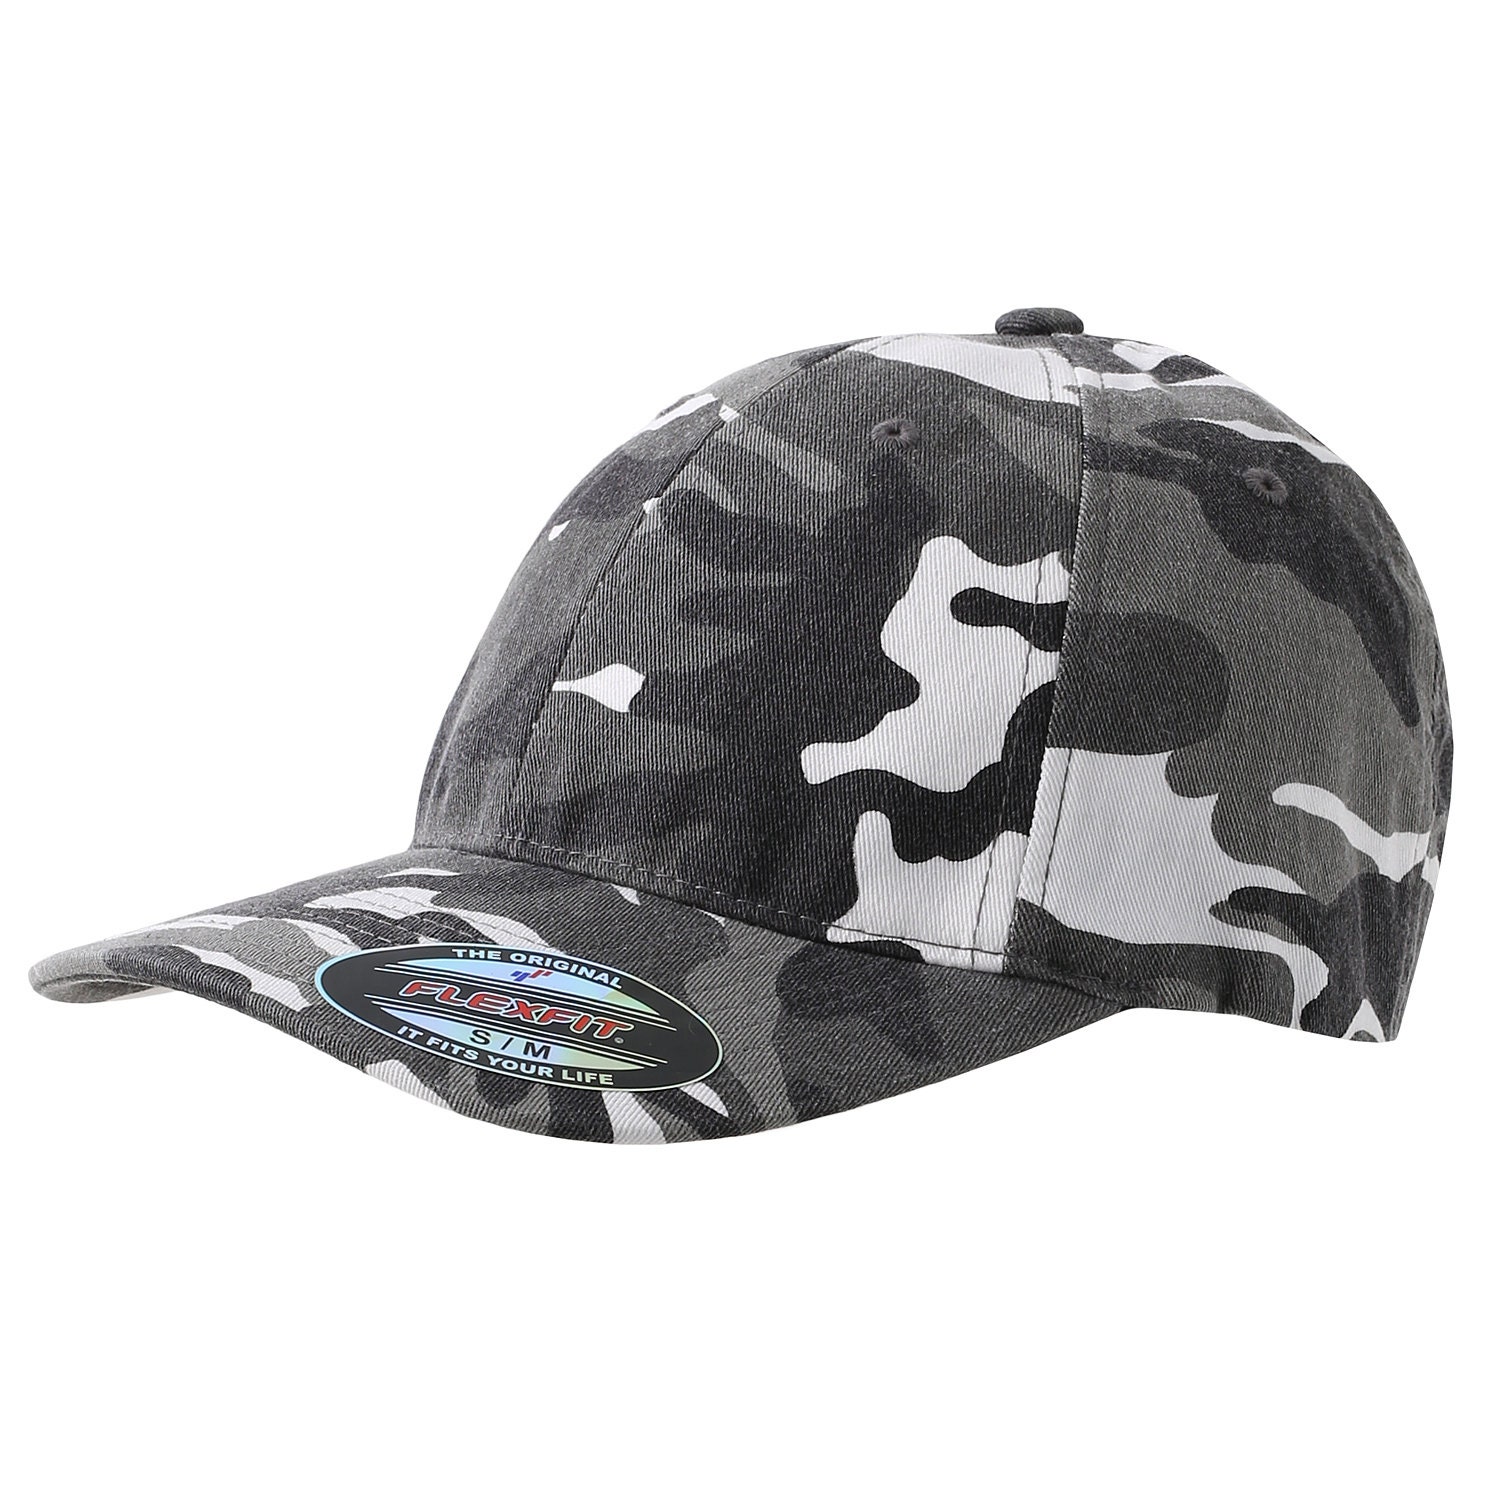 - Baseball Flex-fit Etsy Embroidery, Hat, Custom Personalized Hat With Camouflage Embroidered Custom Cap Flex-fit Camo Fitted